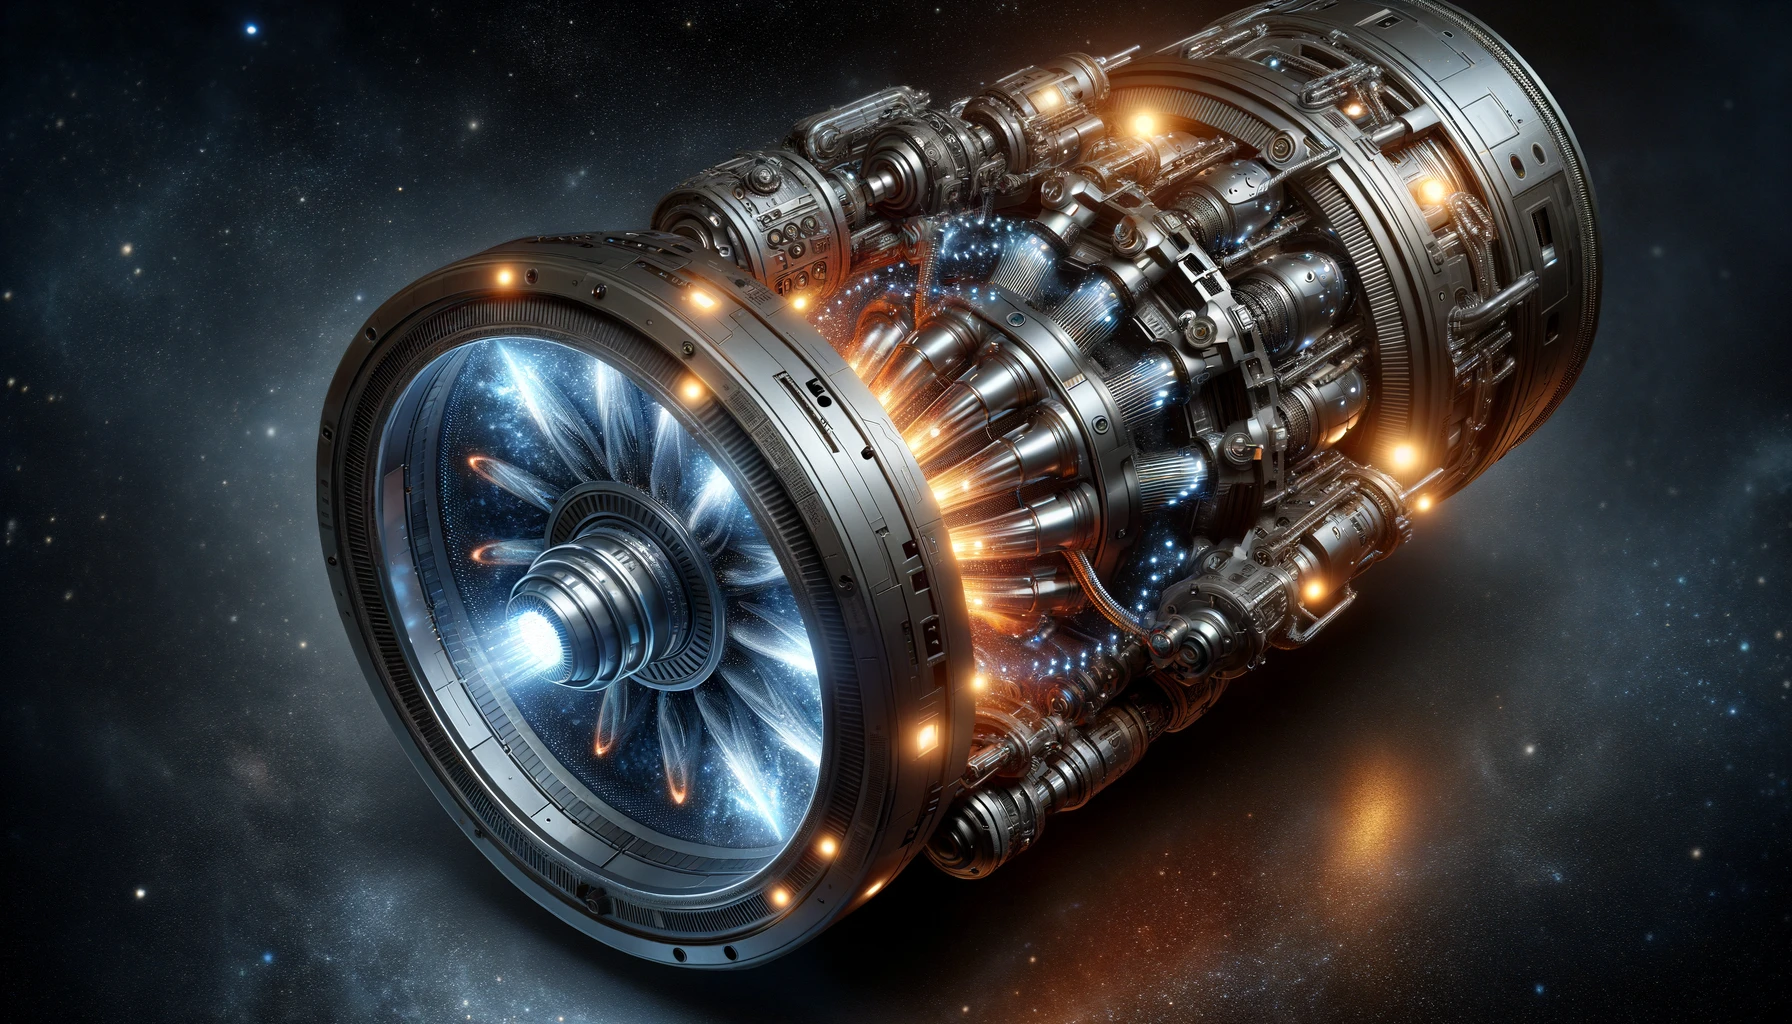 DALL·E 2024 03 03 03.35.23 A realistic image of an antimatter engine designed for interstellar spacecraft. The engine is highly advanced and futuristic featuring a sleek meta